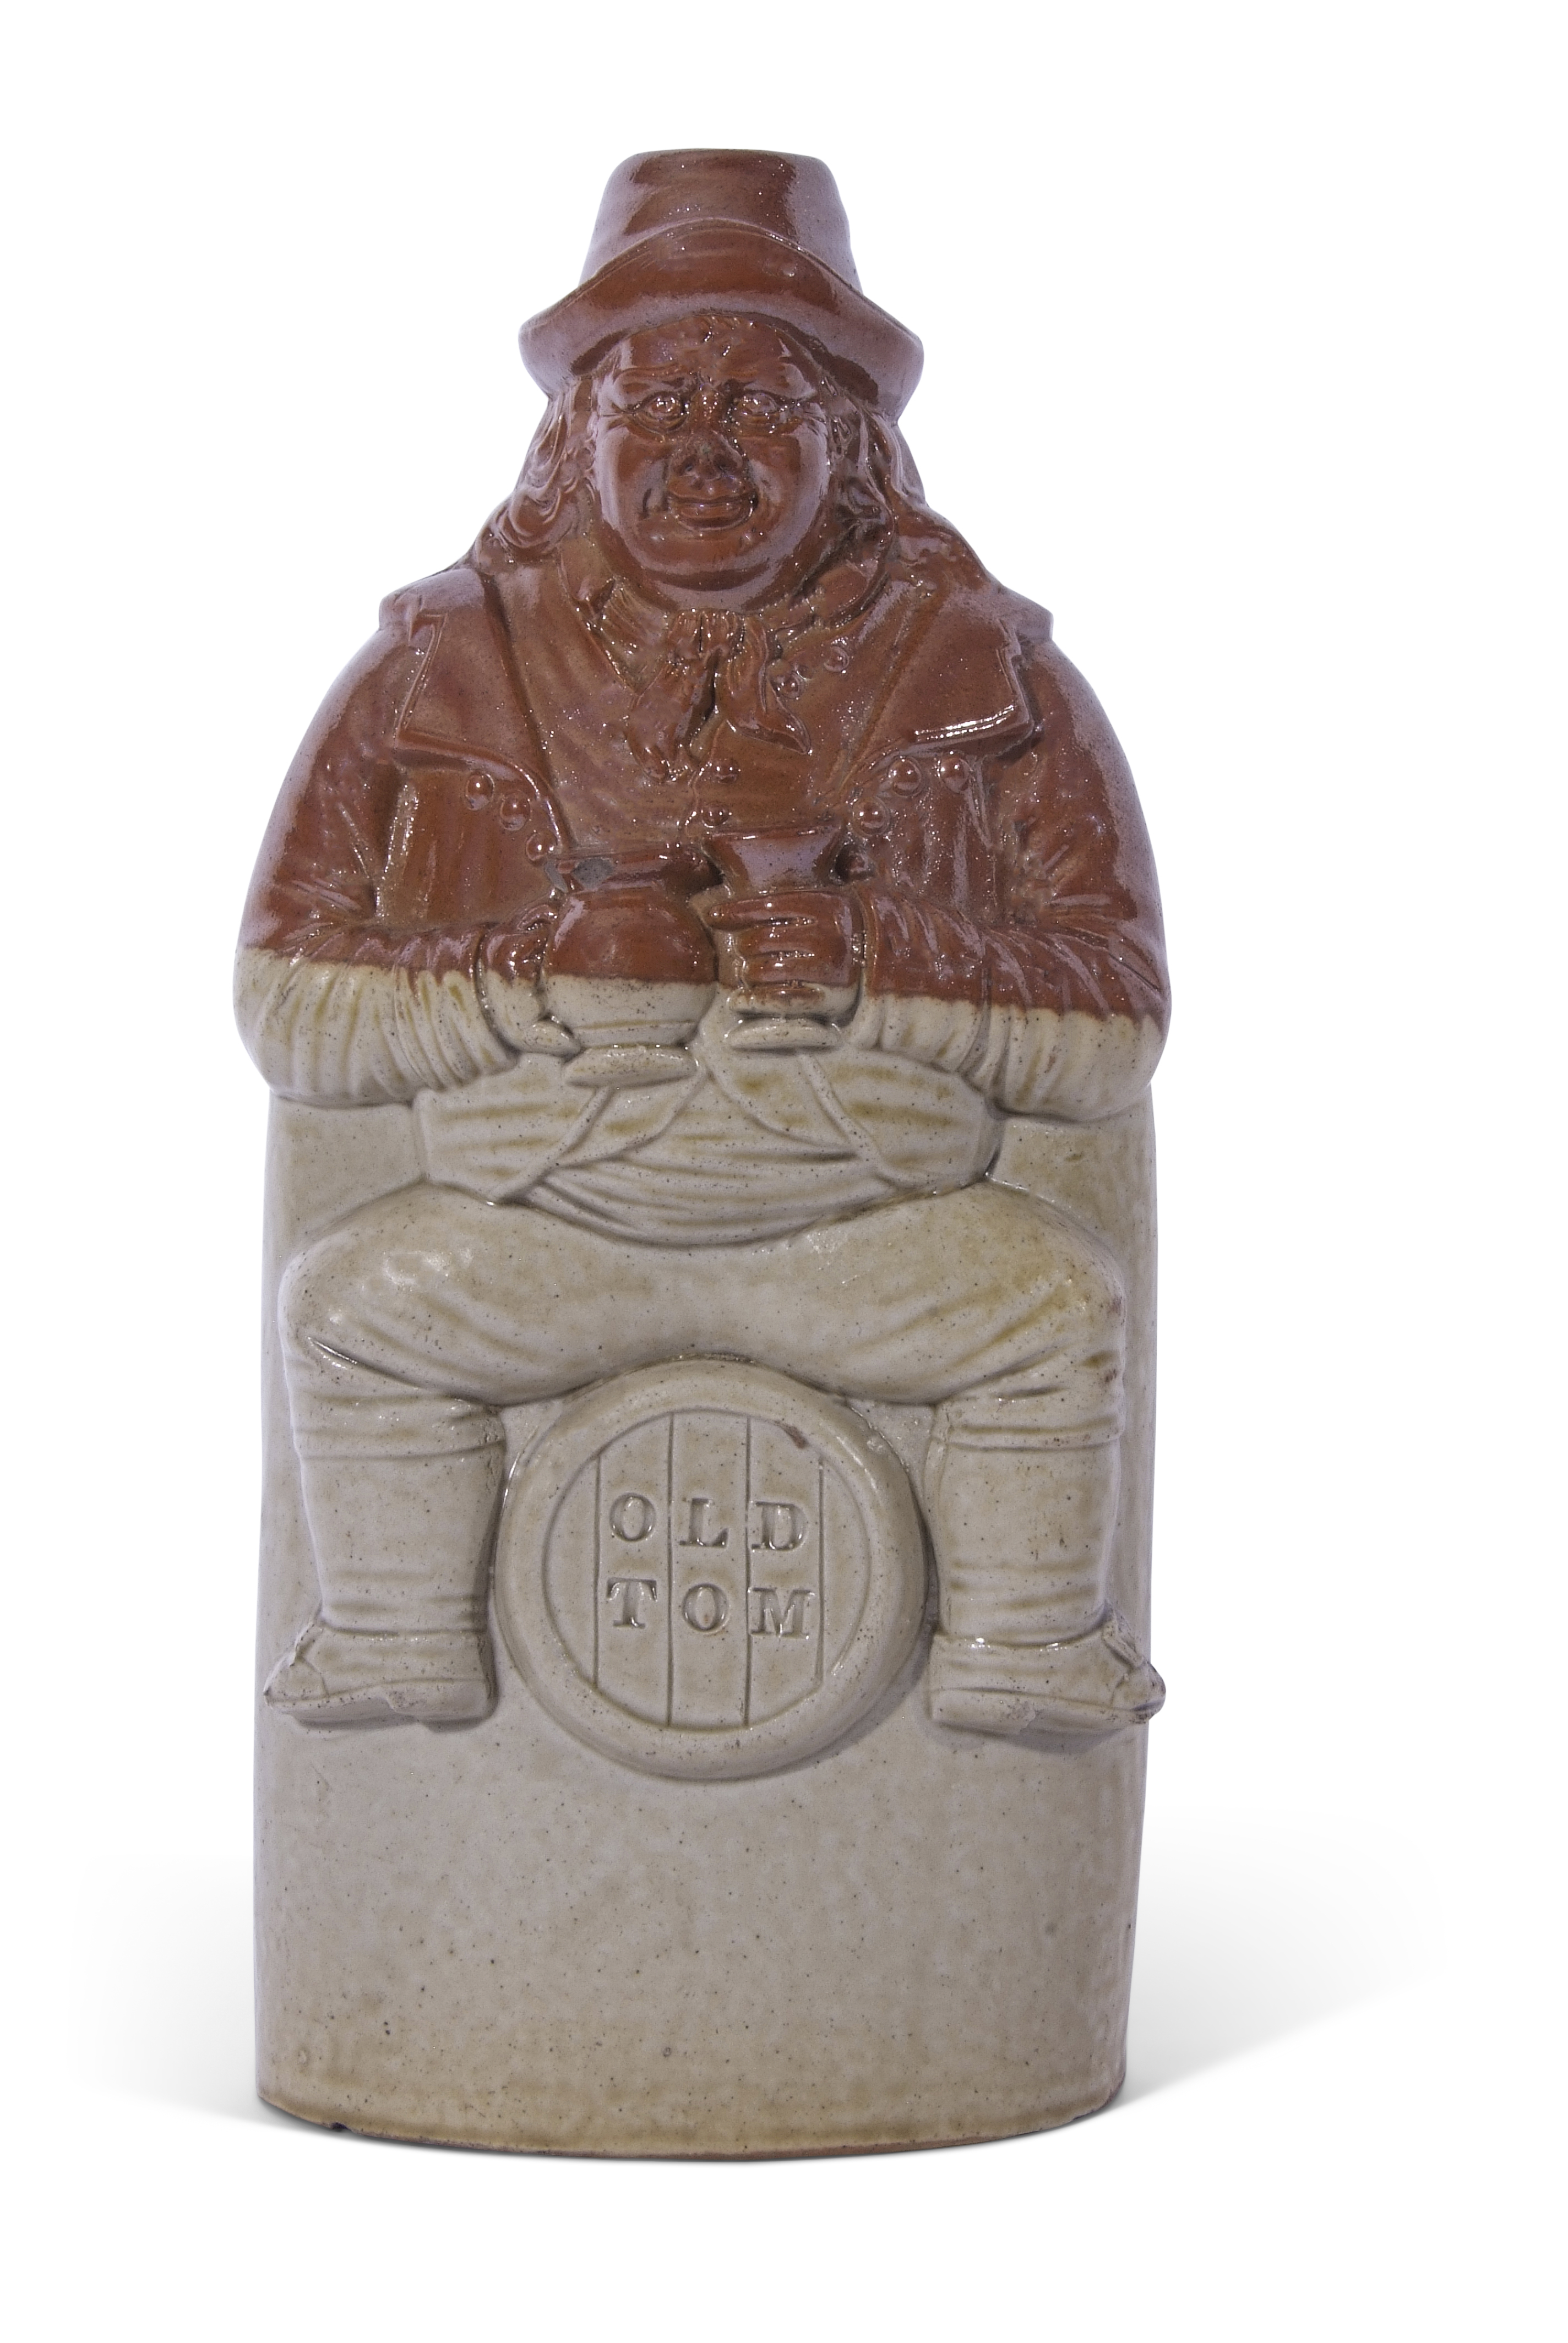 Brampton (Oldfield Pottery) flask moulded as a man on a barrel with the title "Old Tom", impressed